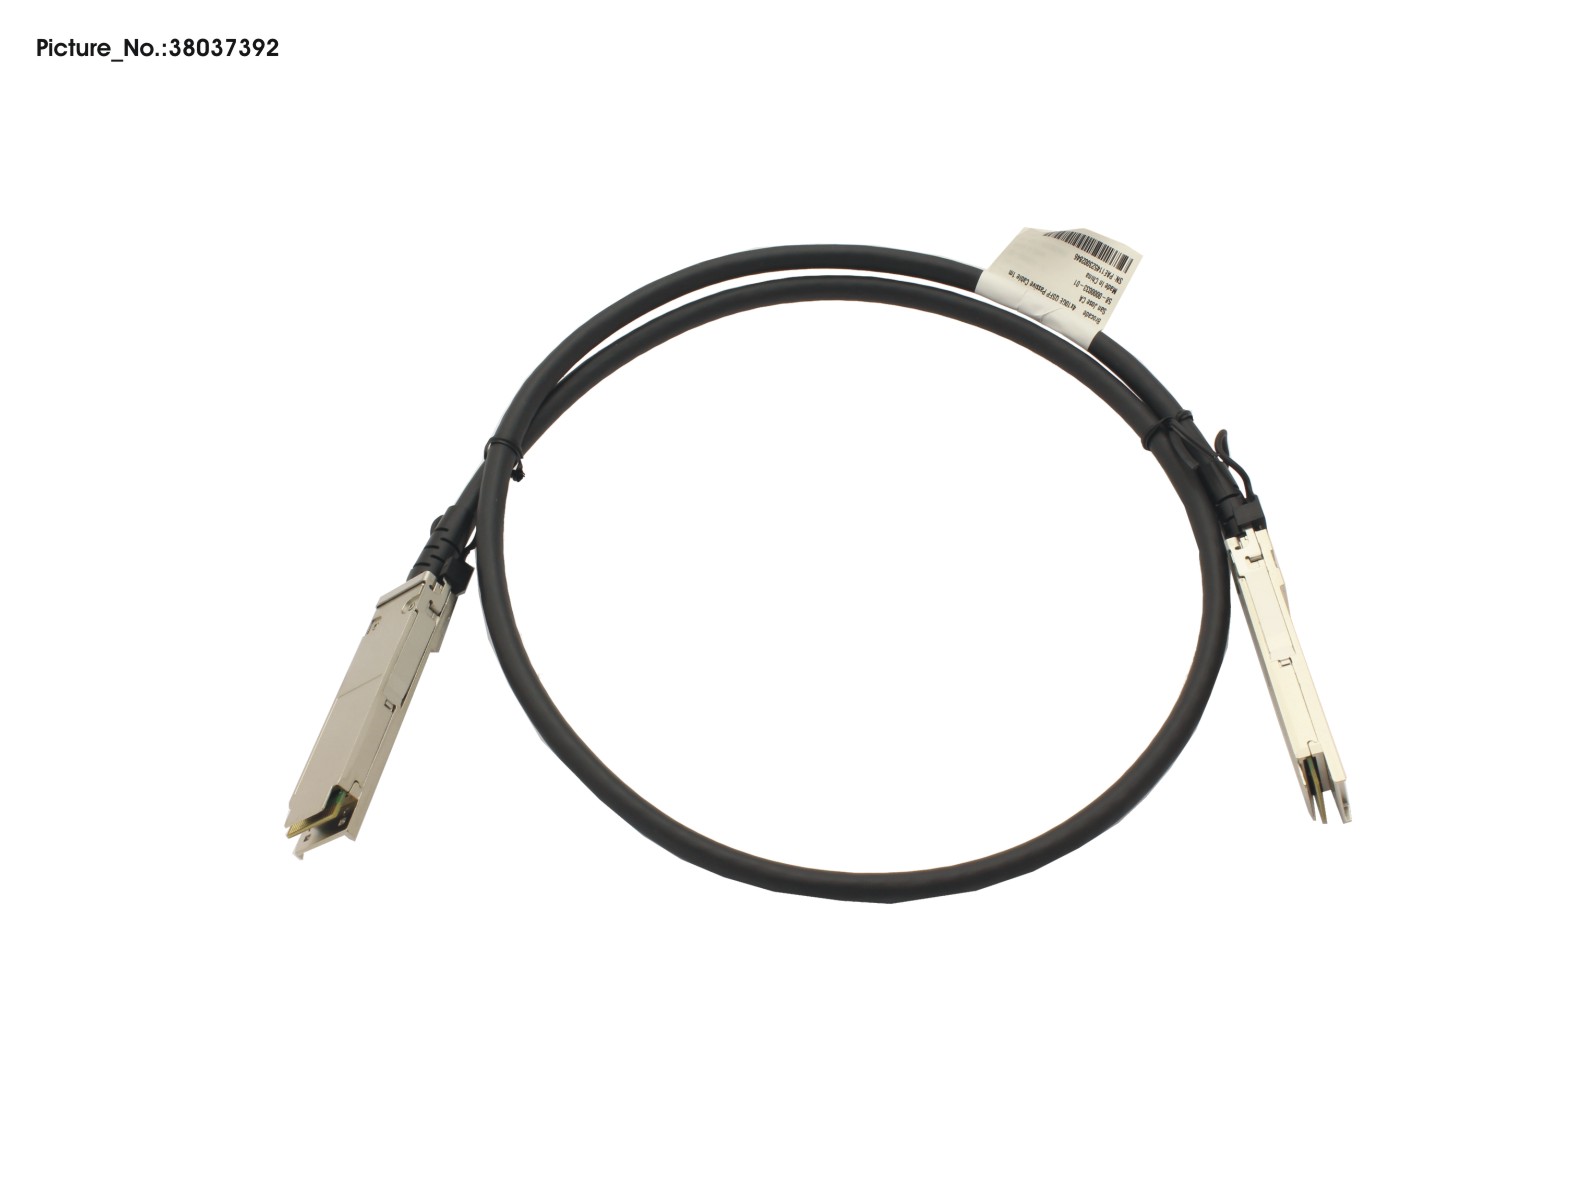 40 GBE QSFP CABLE BROCADE, 1M